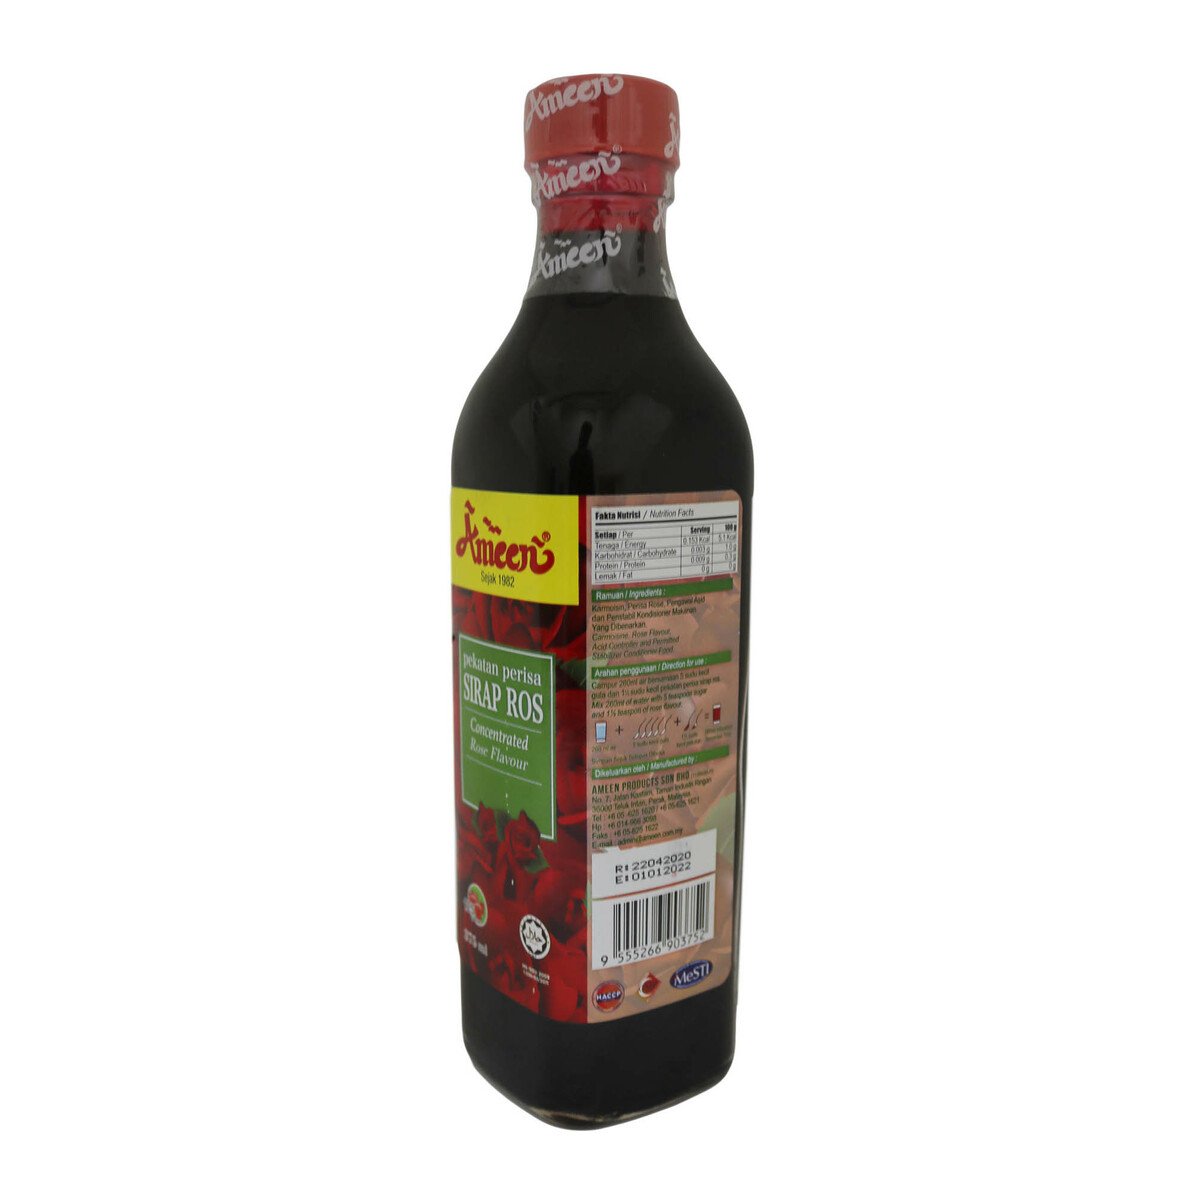 Ameen Cordial Rose Flavour 395ml